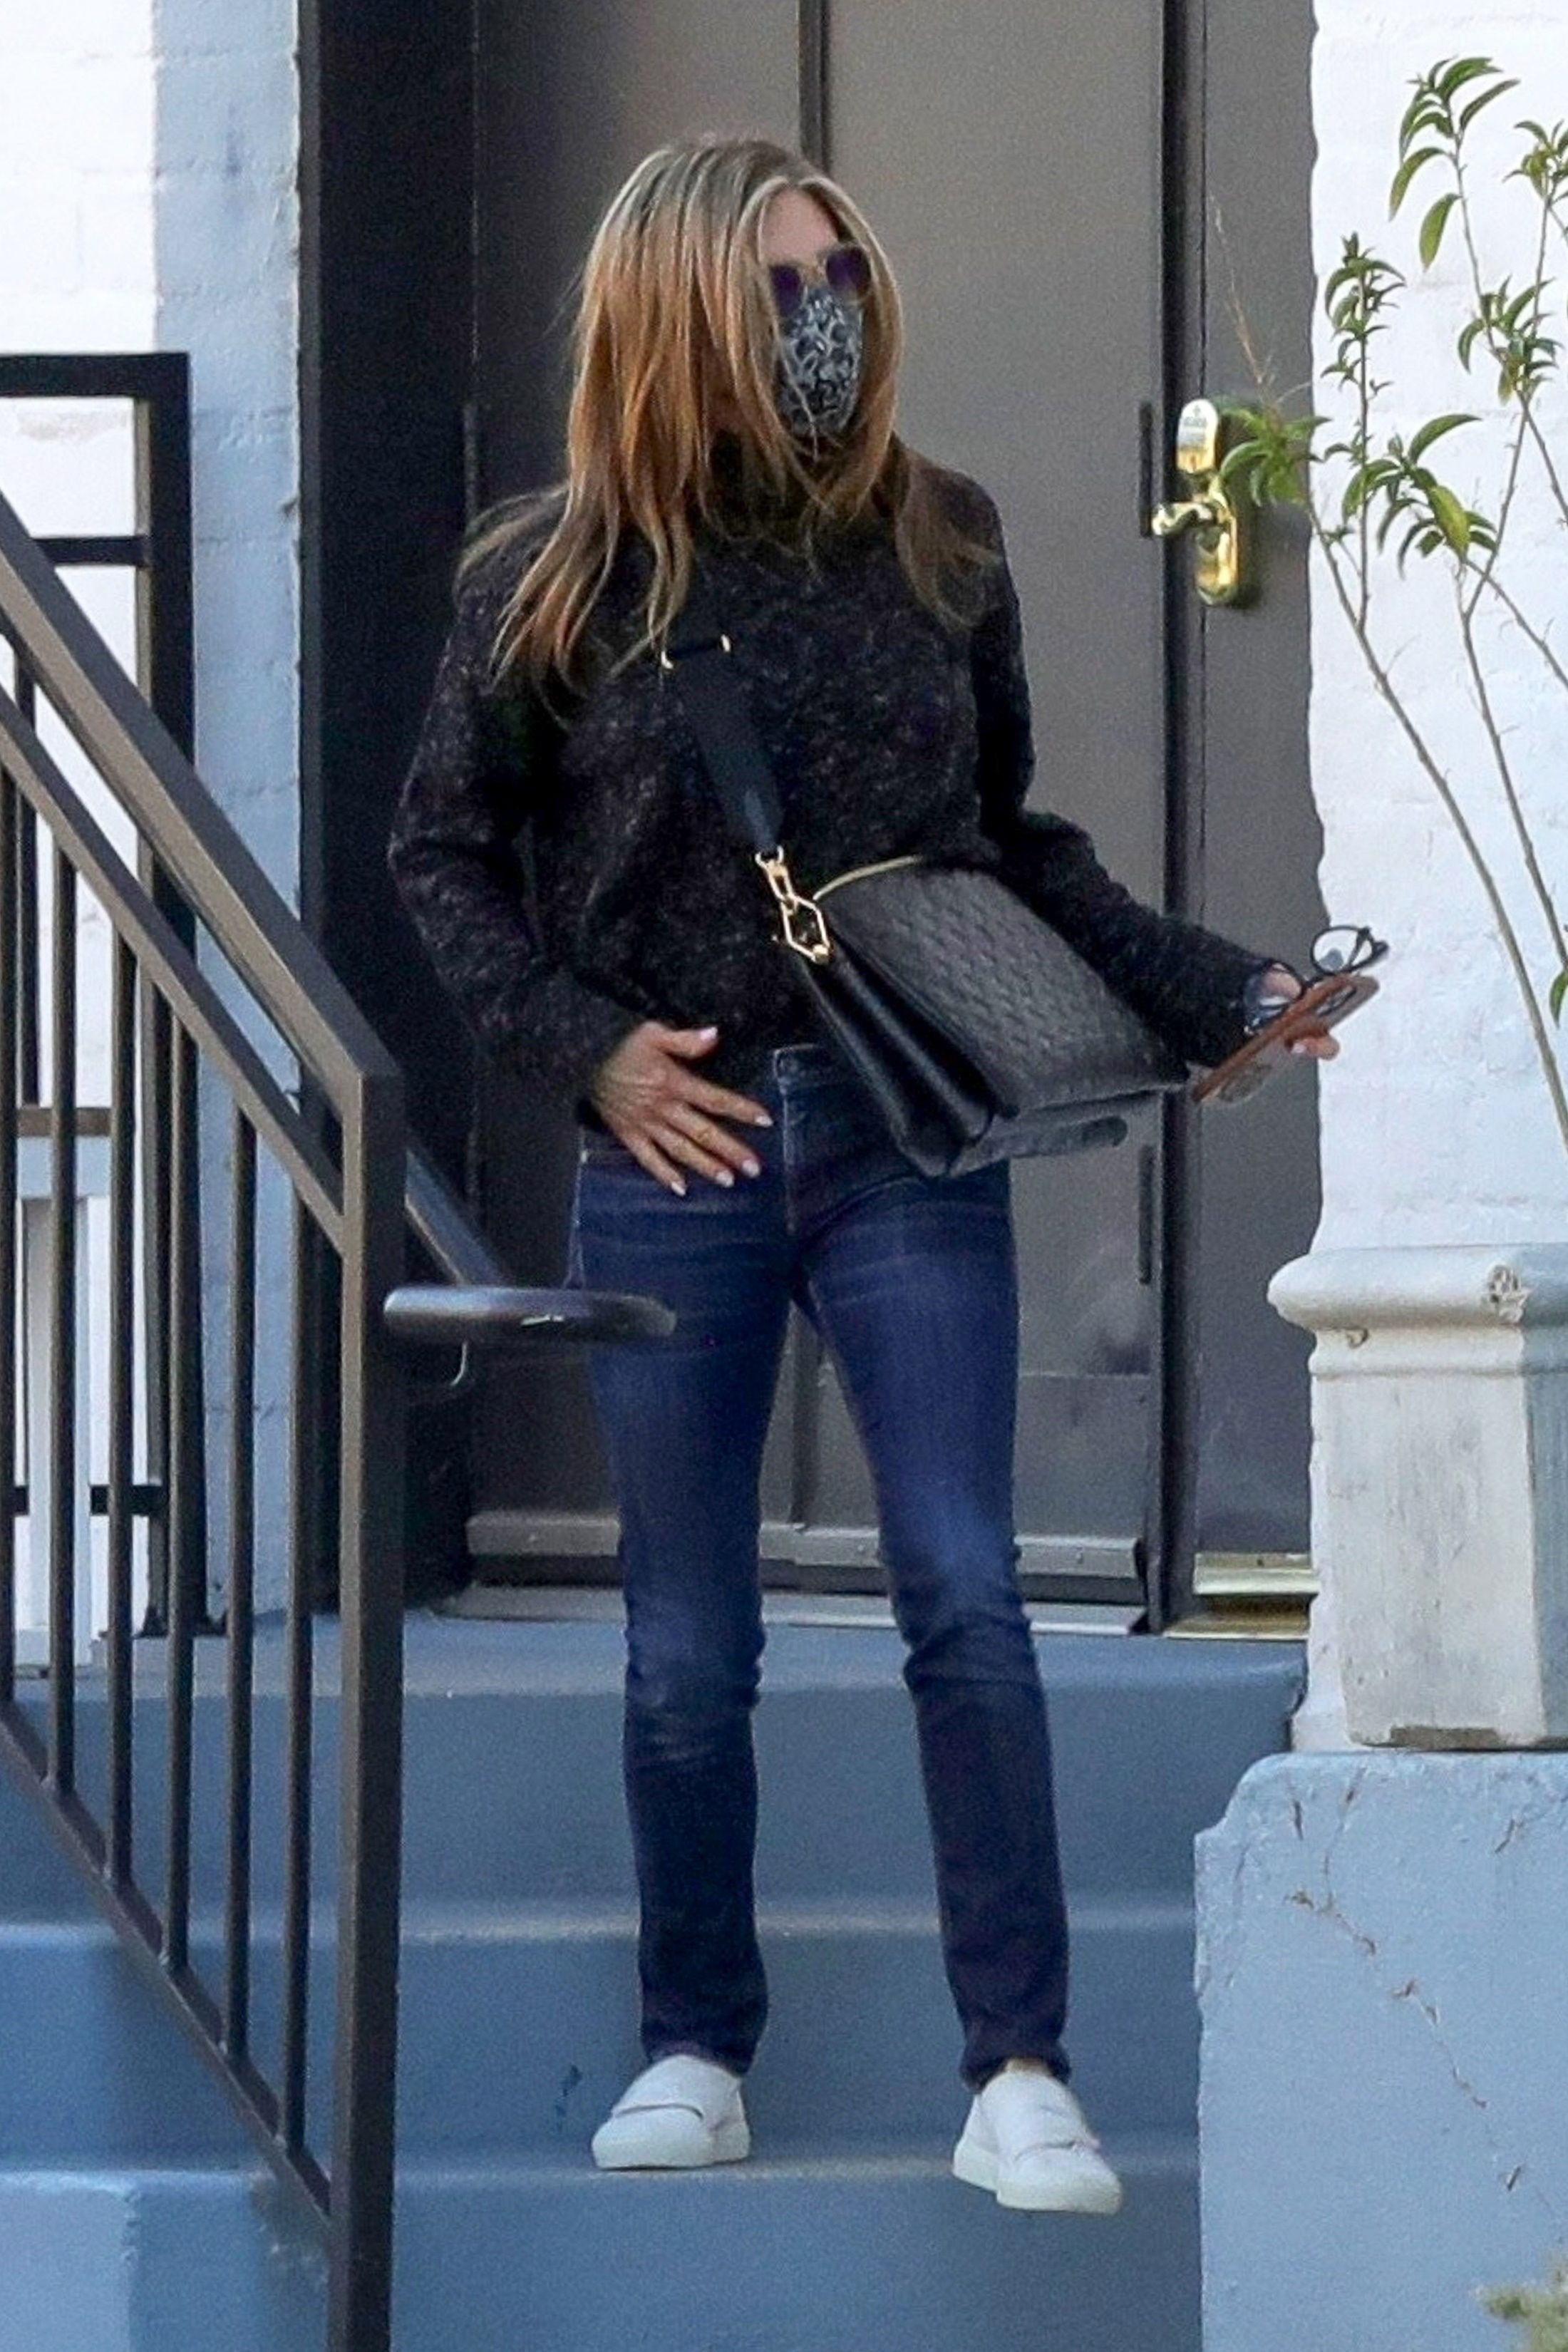 Aniston Casual Cropped Jeans